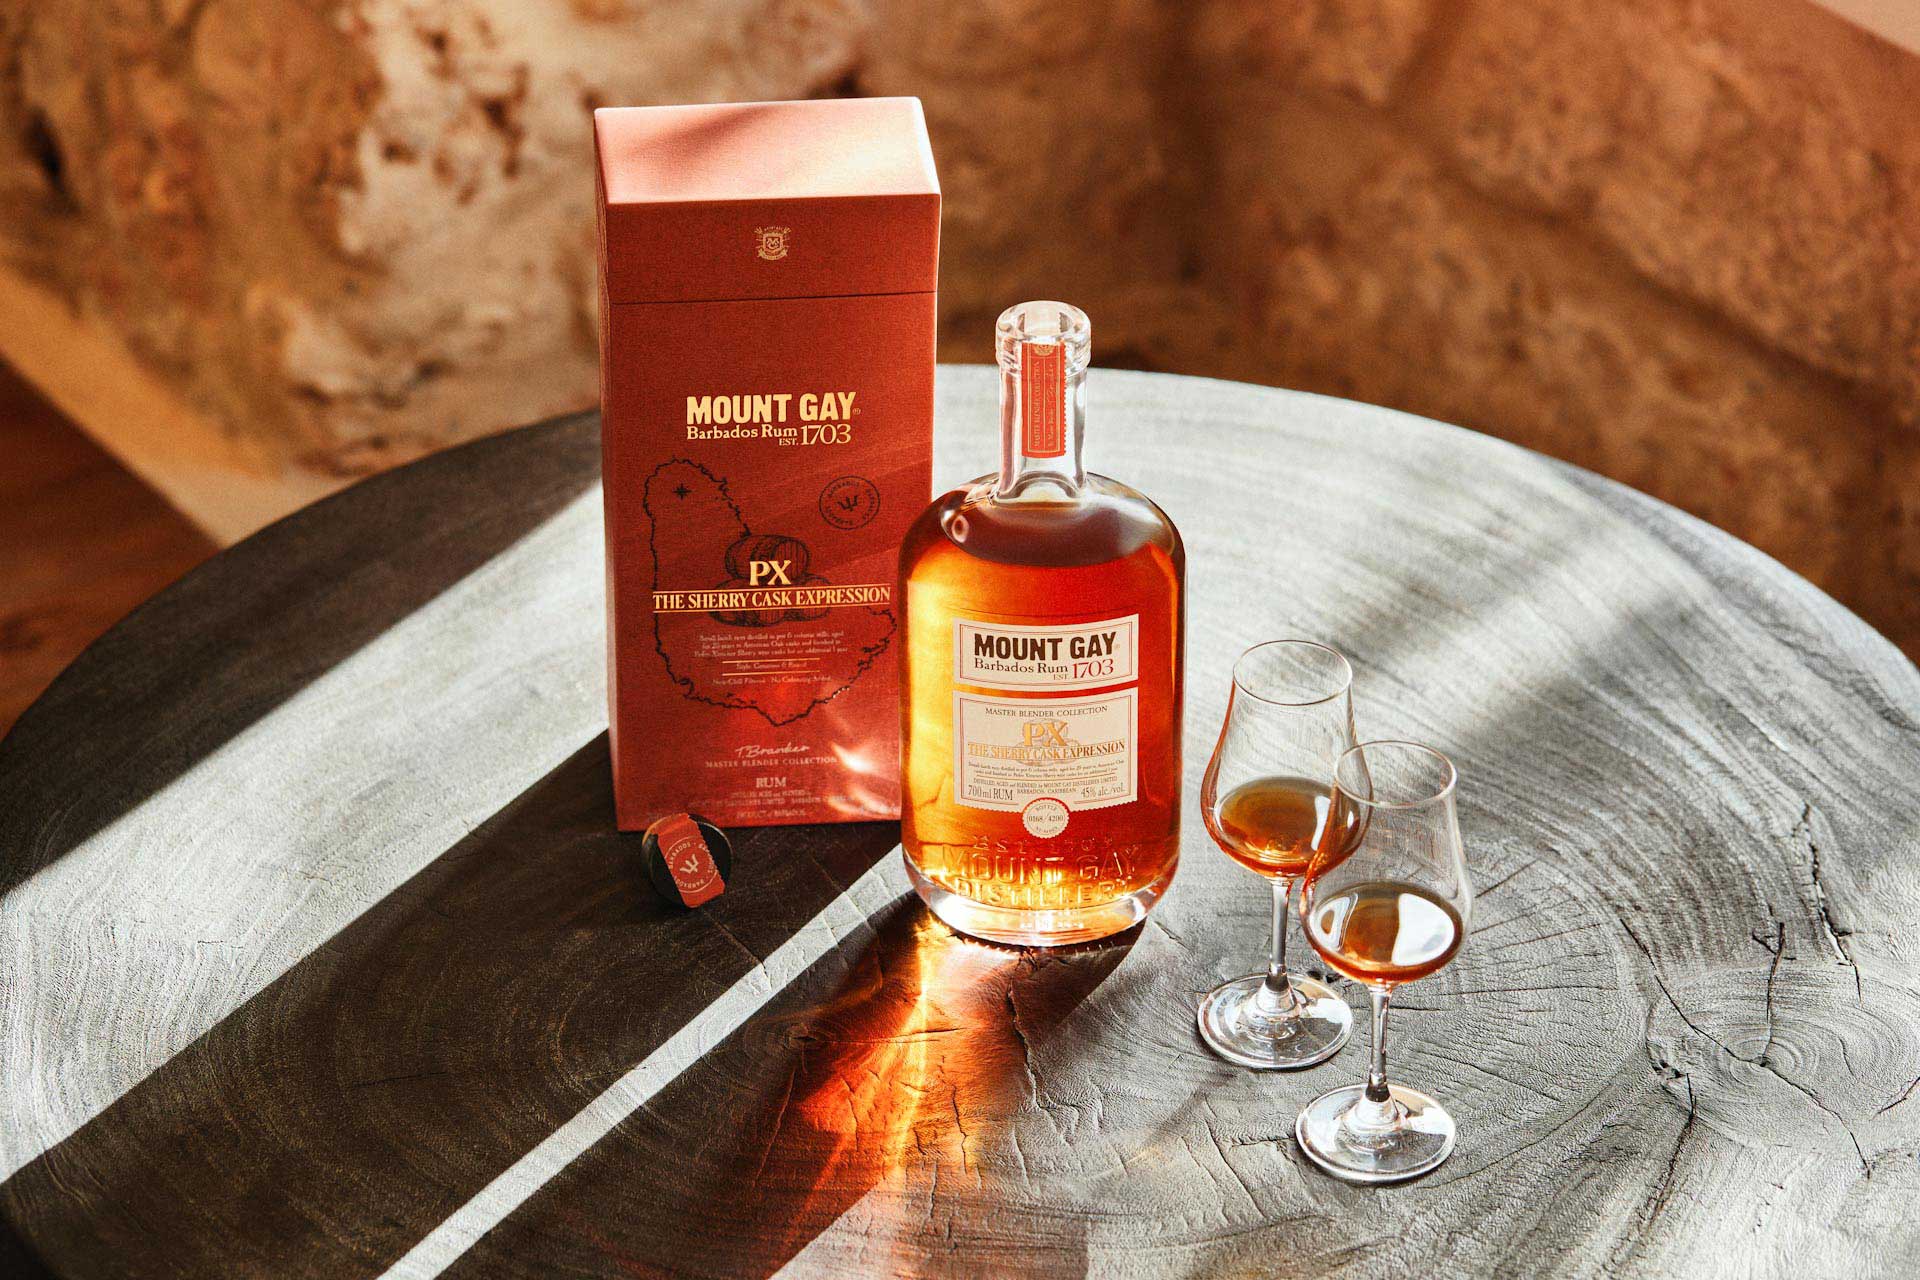 Mount Gay PX Sherry Cask Expression Bottle with Box and 2 wine bottles with nice shadow lightings